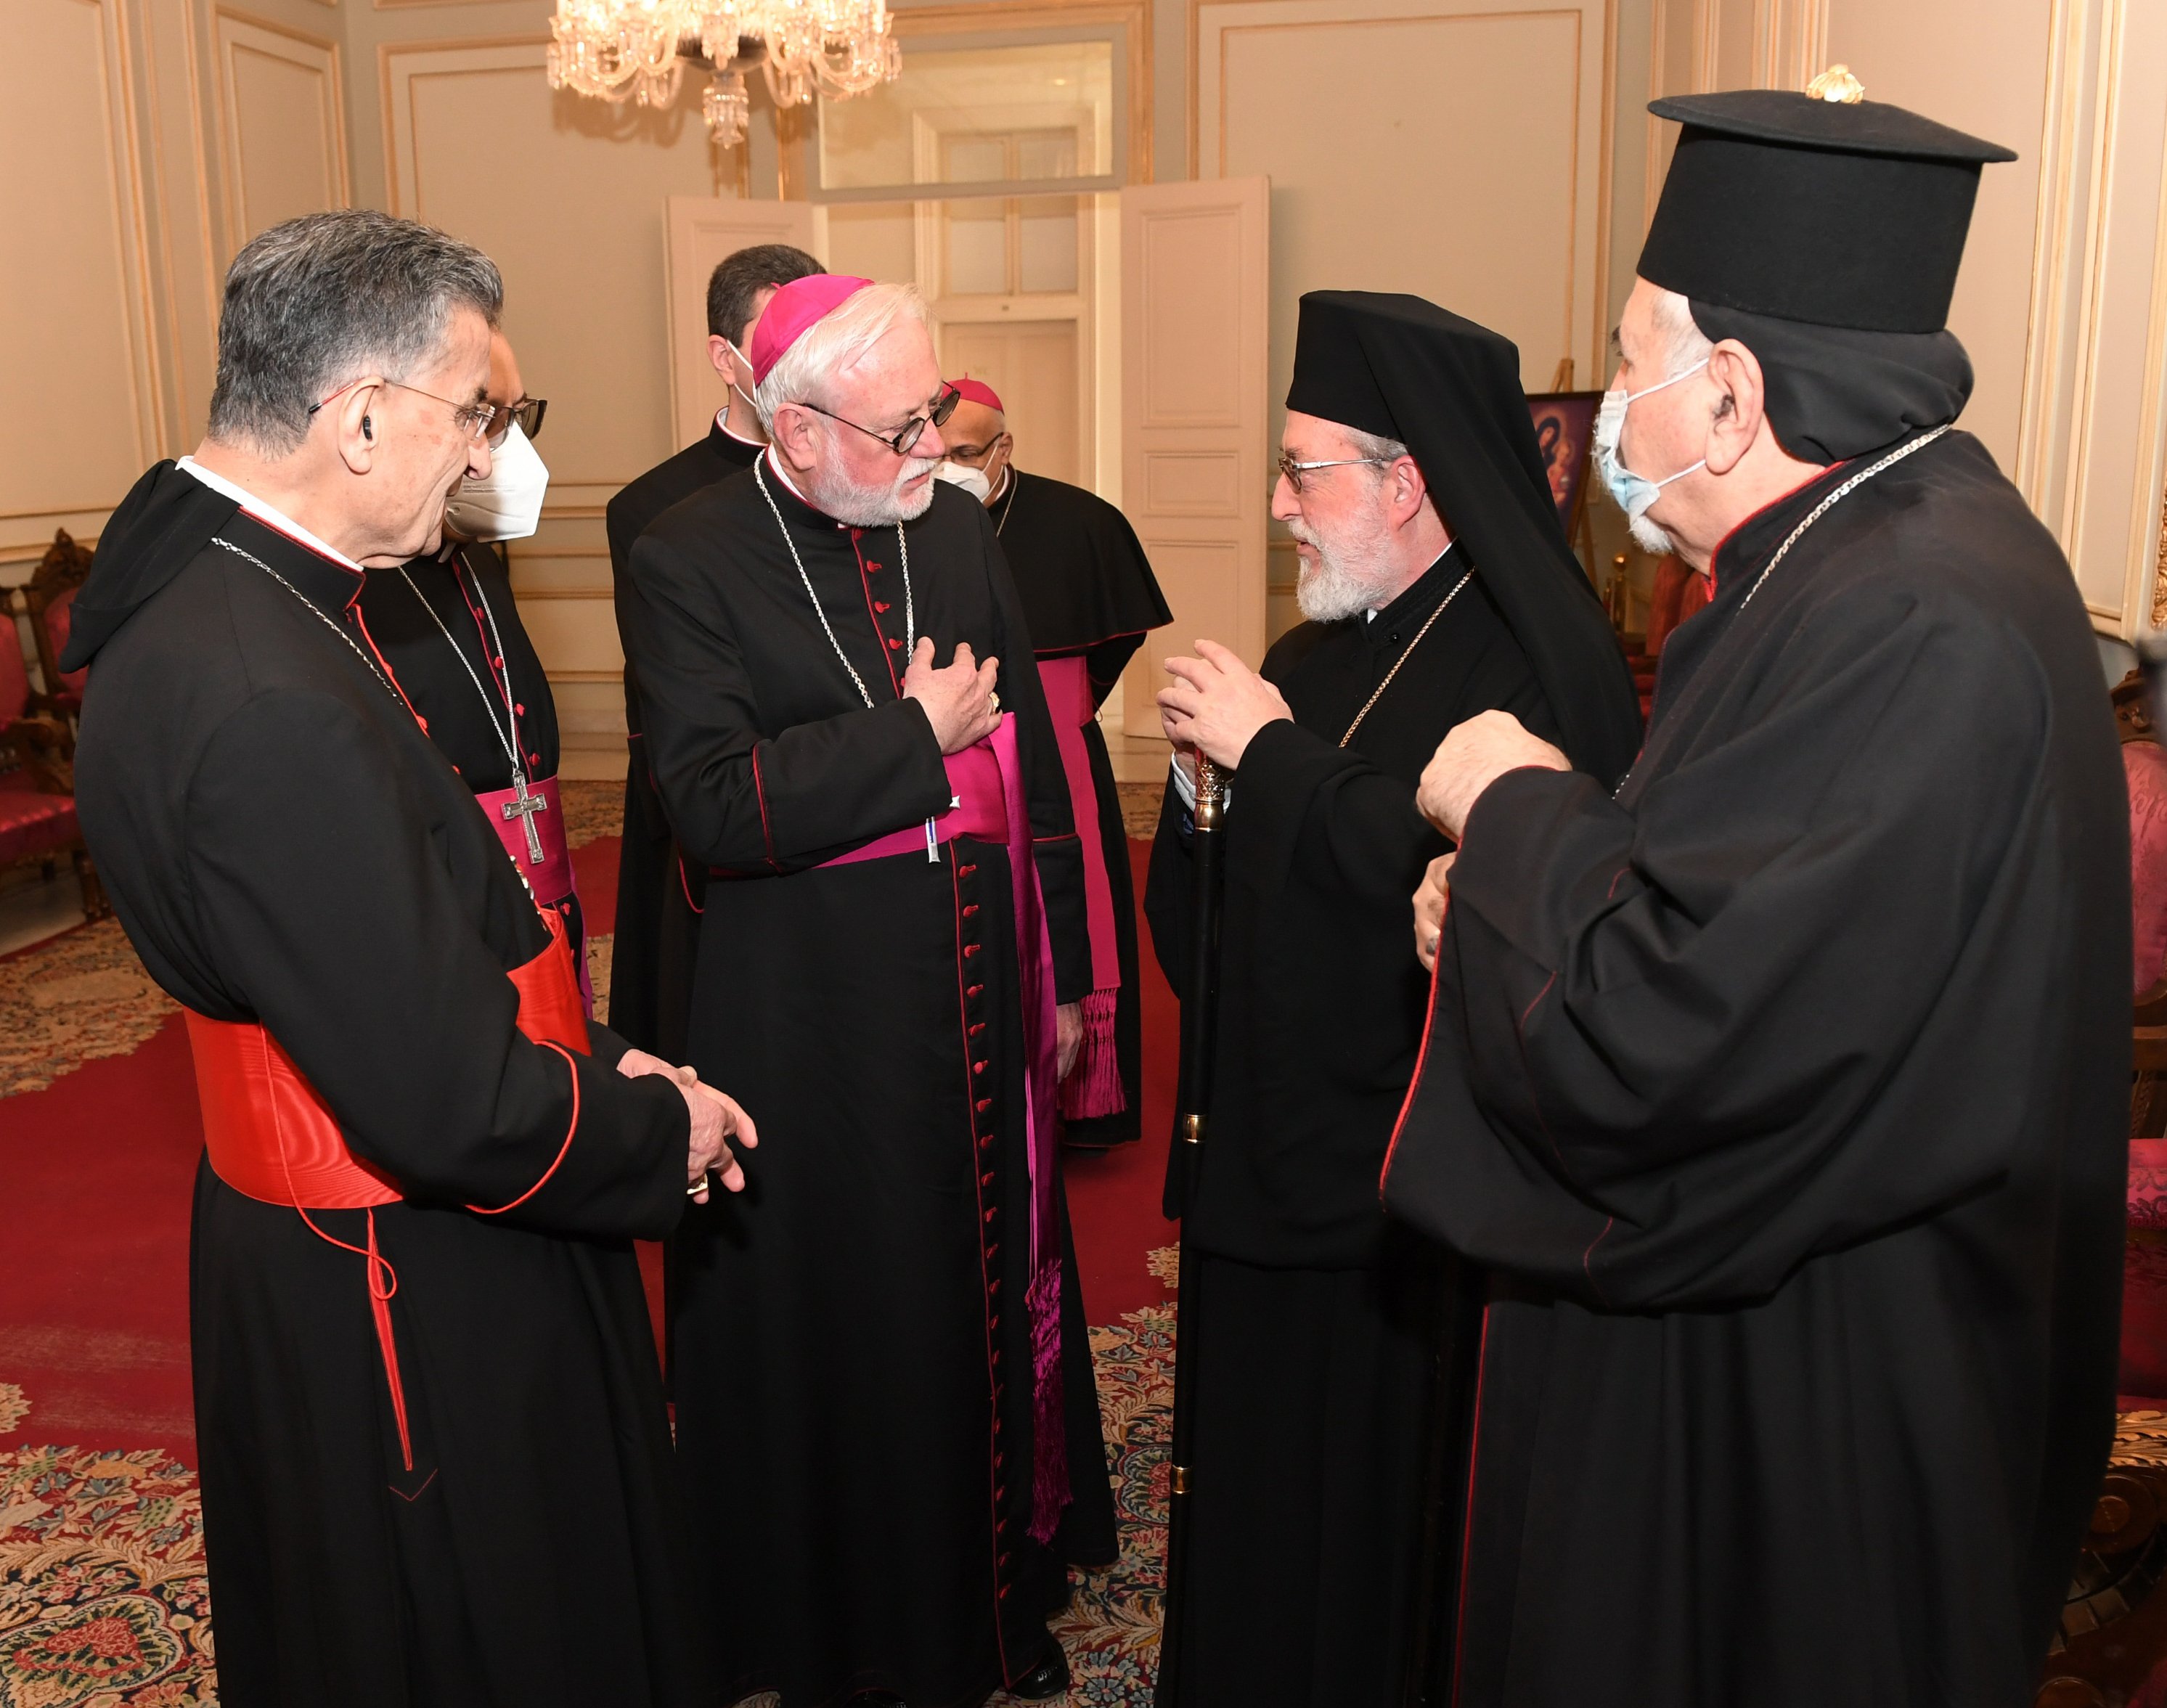 Archbishop Paul Gallagher, Vatican foreign minister, center, speaks with Metropolitan Elias Kfoury, representing Greek Orthodox Patriarch John X, Feb. 2, as they attend the monthly meeting of the Maronite Catholic bishops at Bkerke, near Beirut. (CNS)